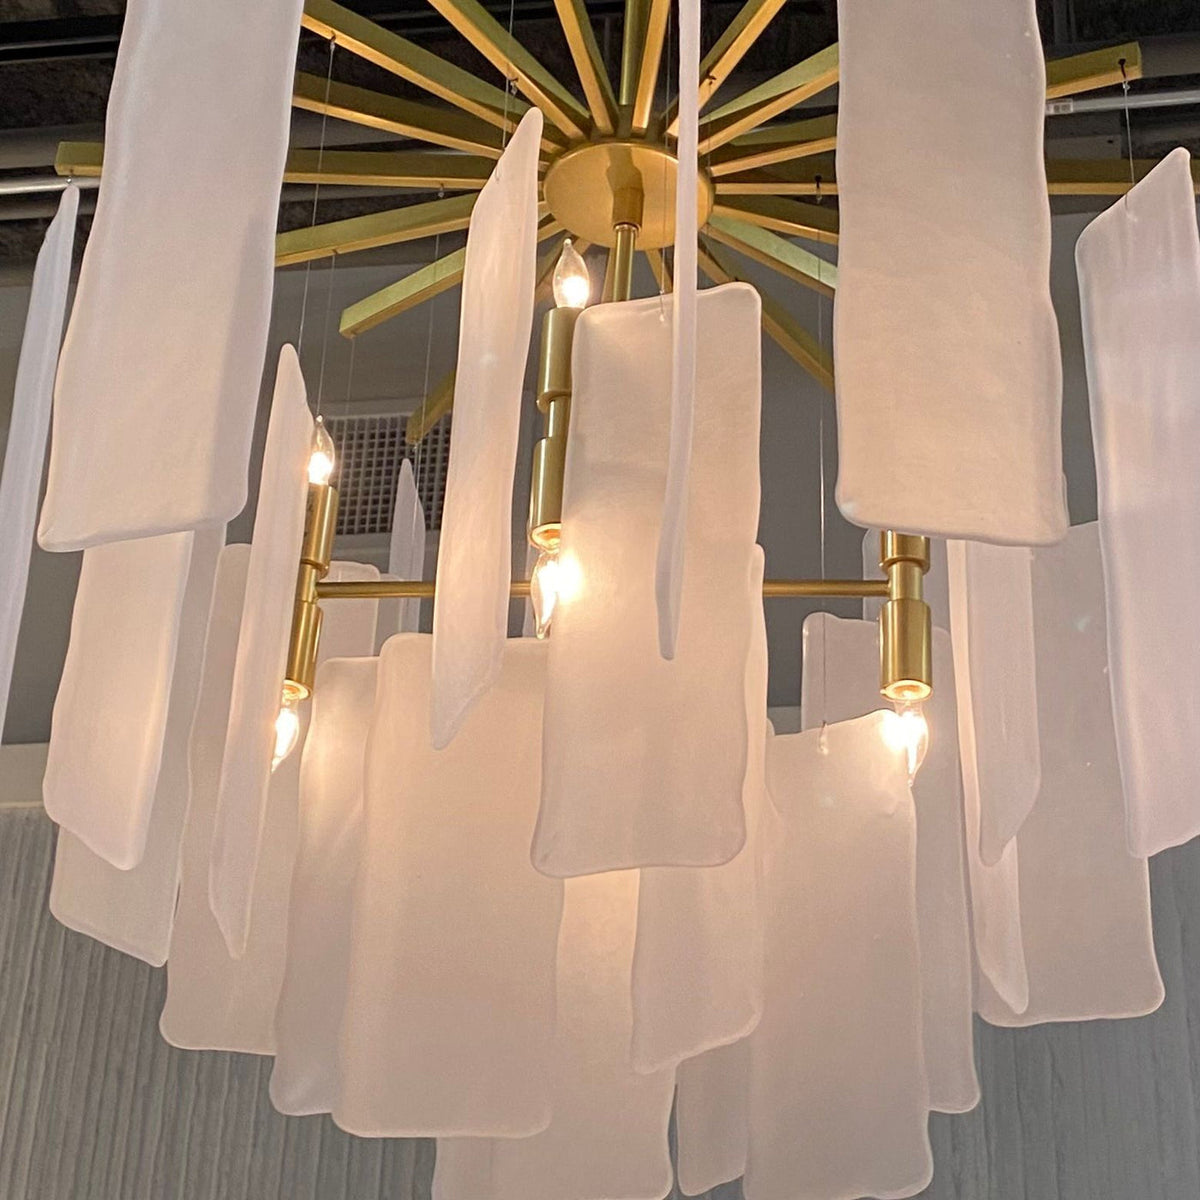 Tulsa Antique Brass and Frosted Glass Chandelier